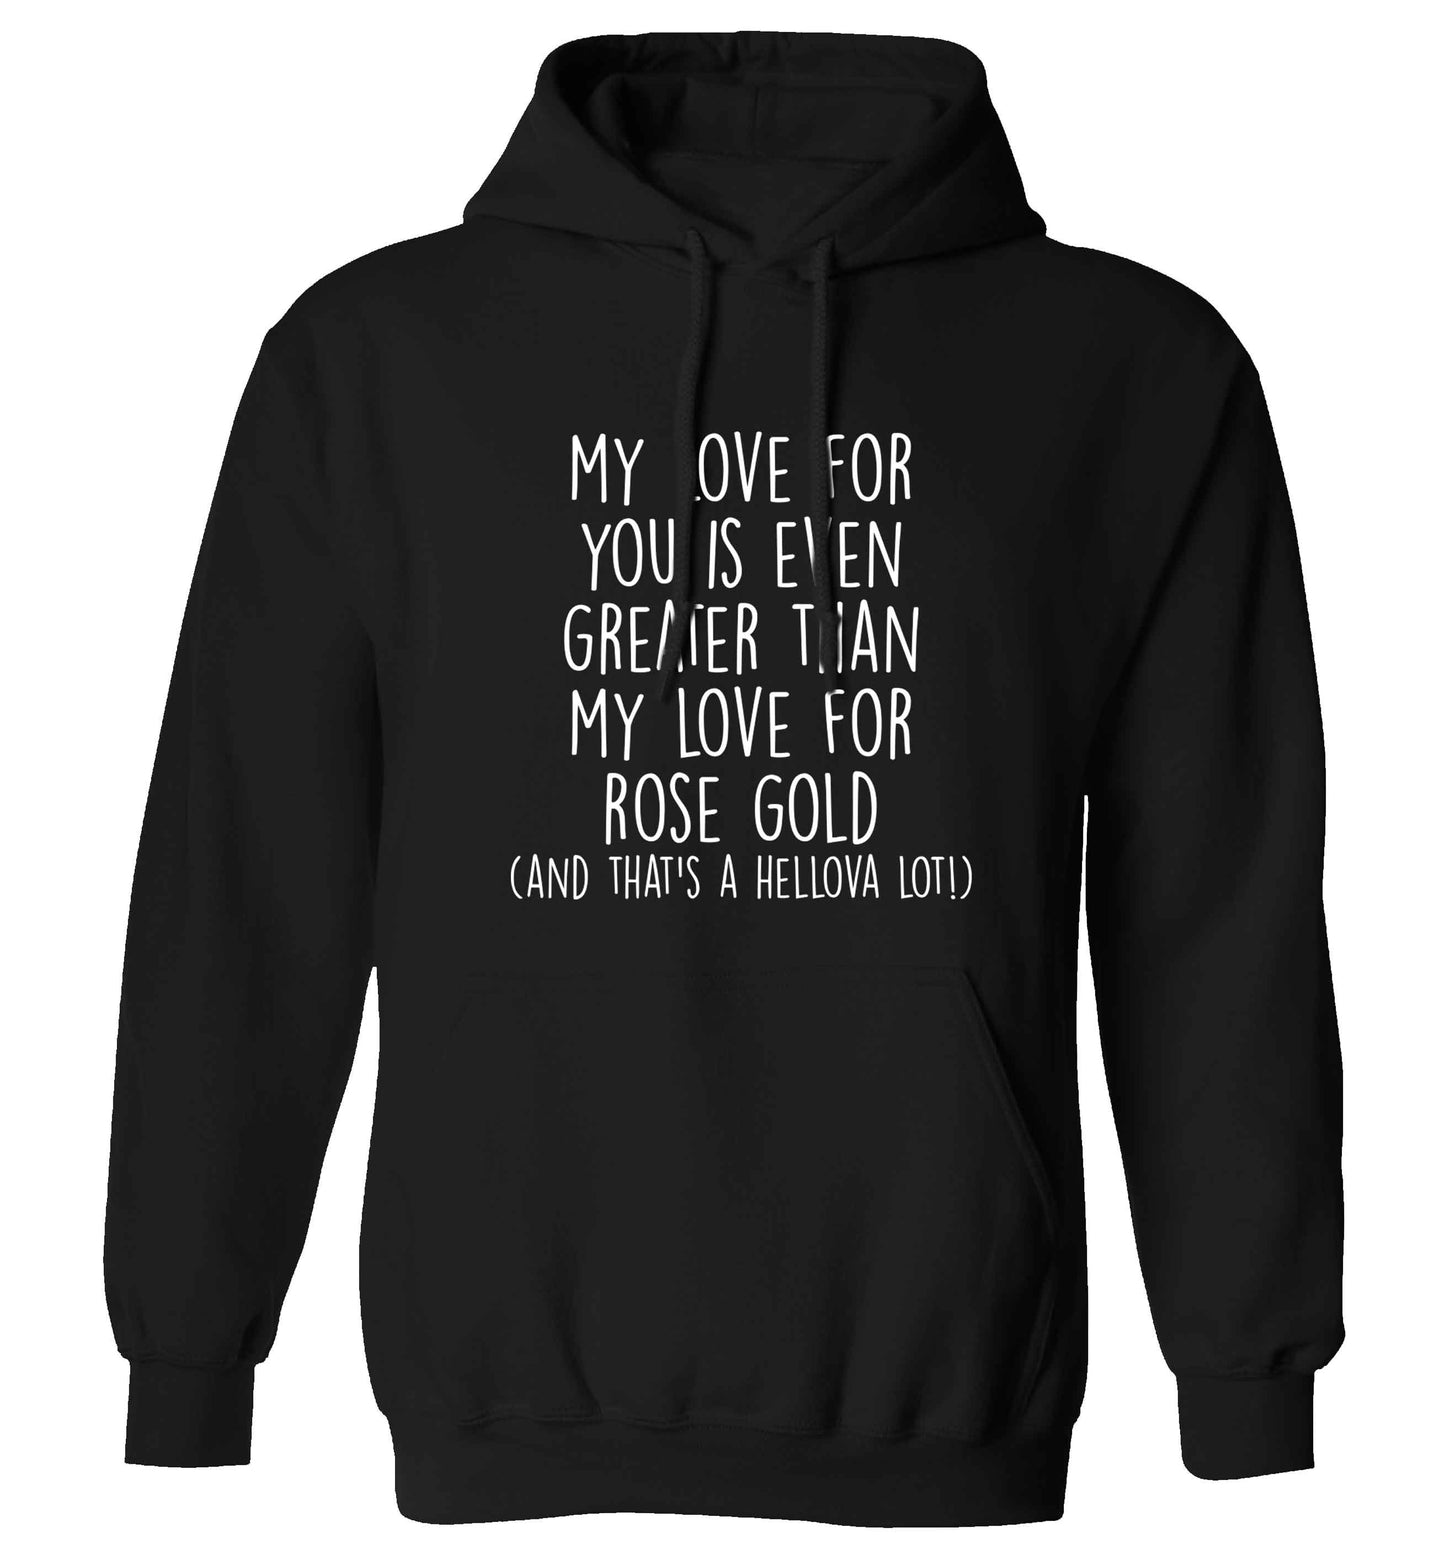 My love for you is even greater than my love for rose gold (and that's a hellova lot) adults unisex black hoodie 2XL